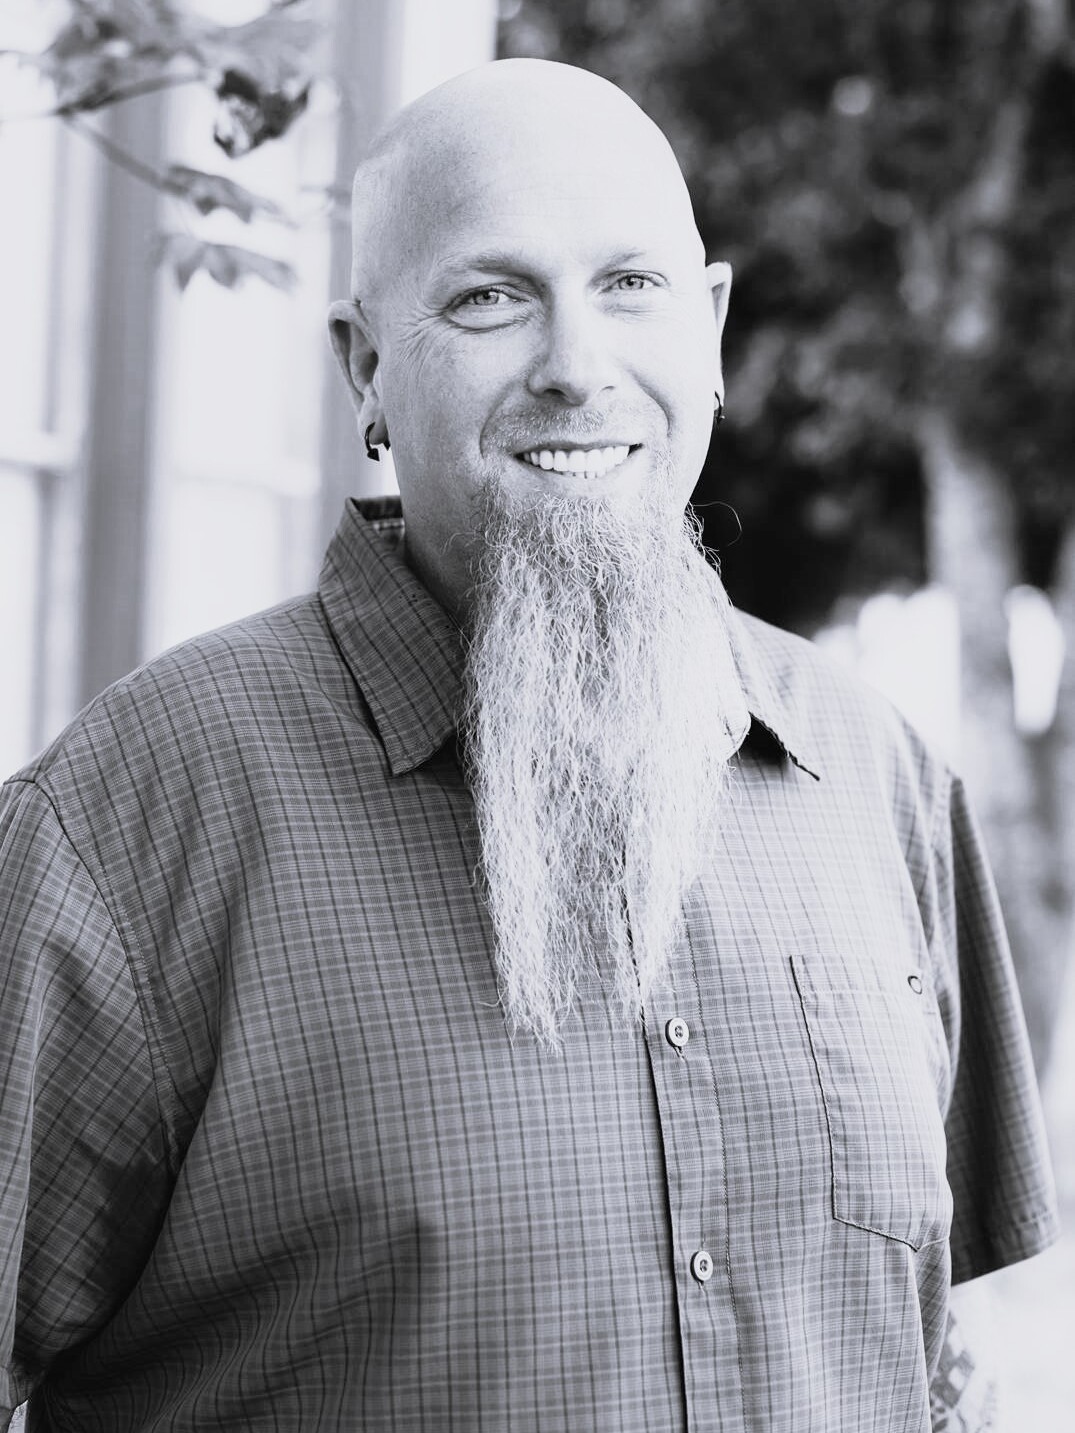 A black and white photo of a bald man with a beard, portraying confidence and authority.